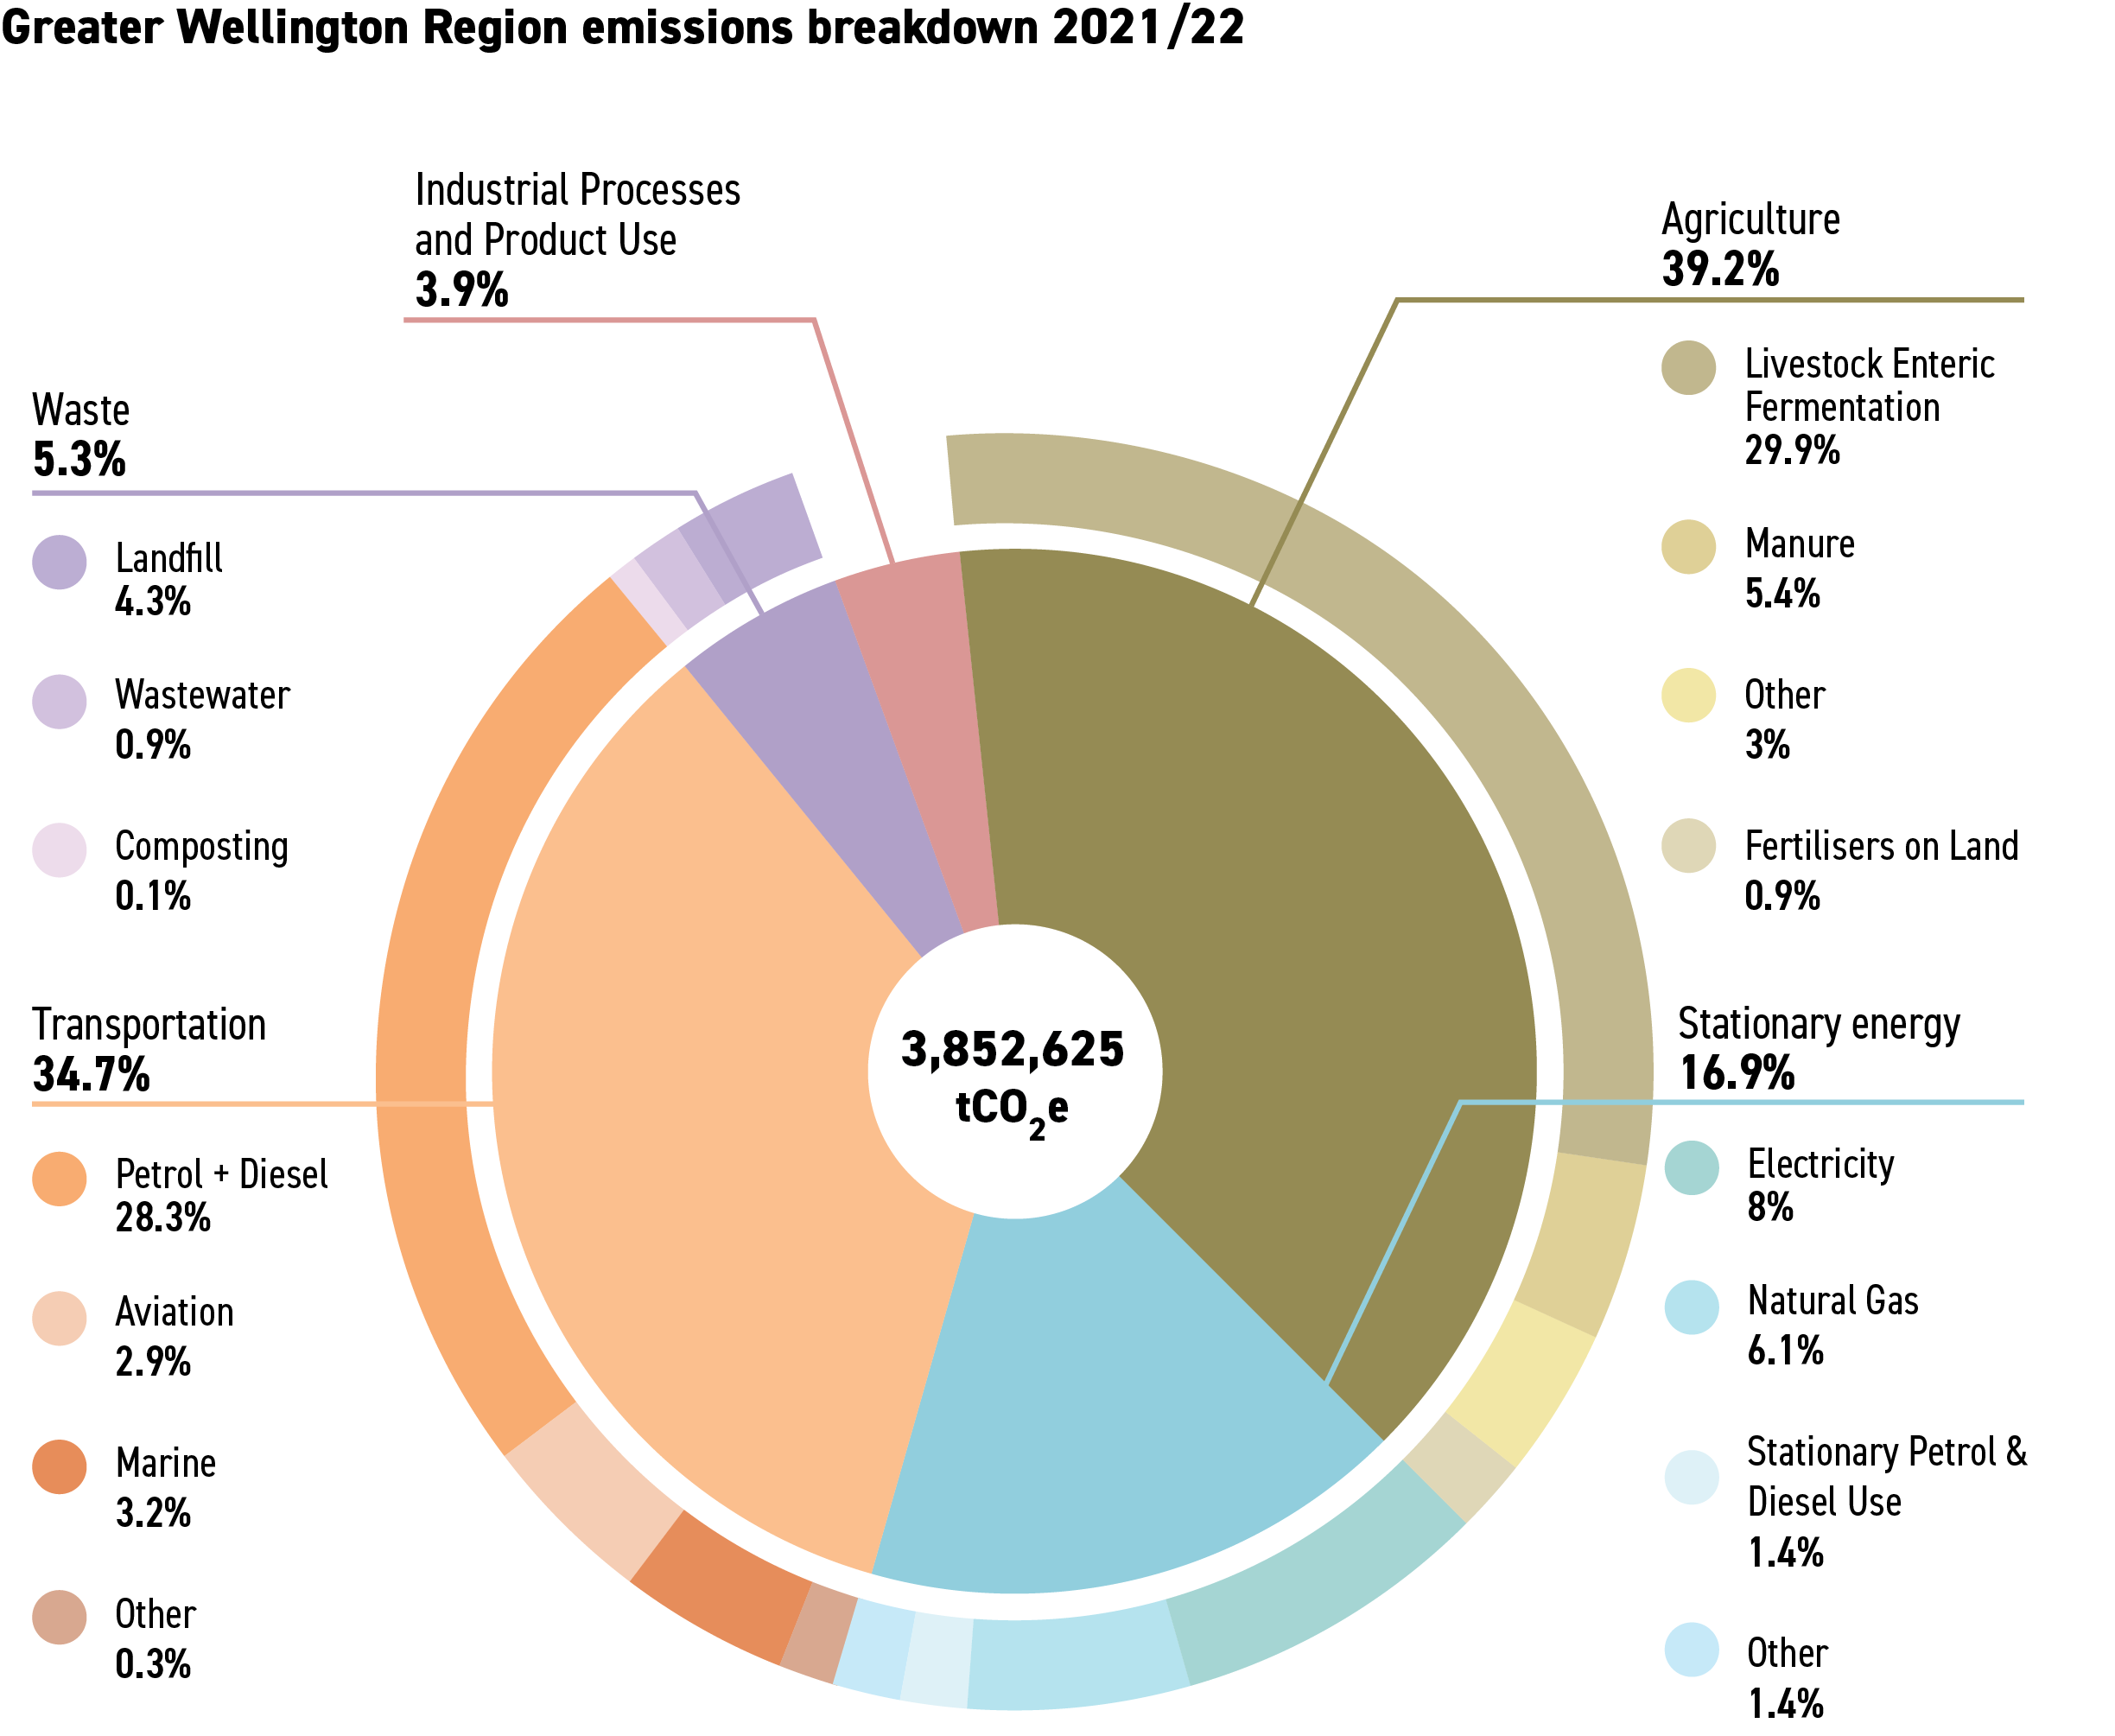 Graph showing the Greater Wellington Regional emissions breakdown for 2021/22